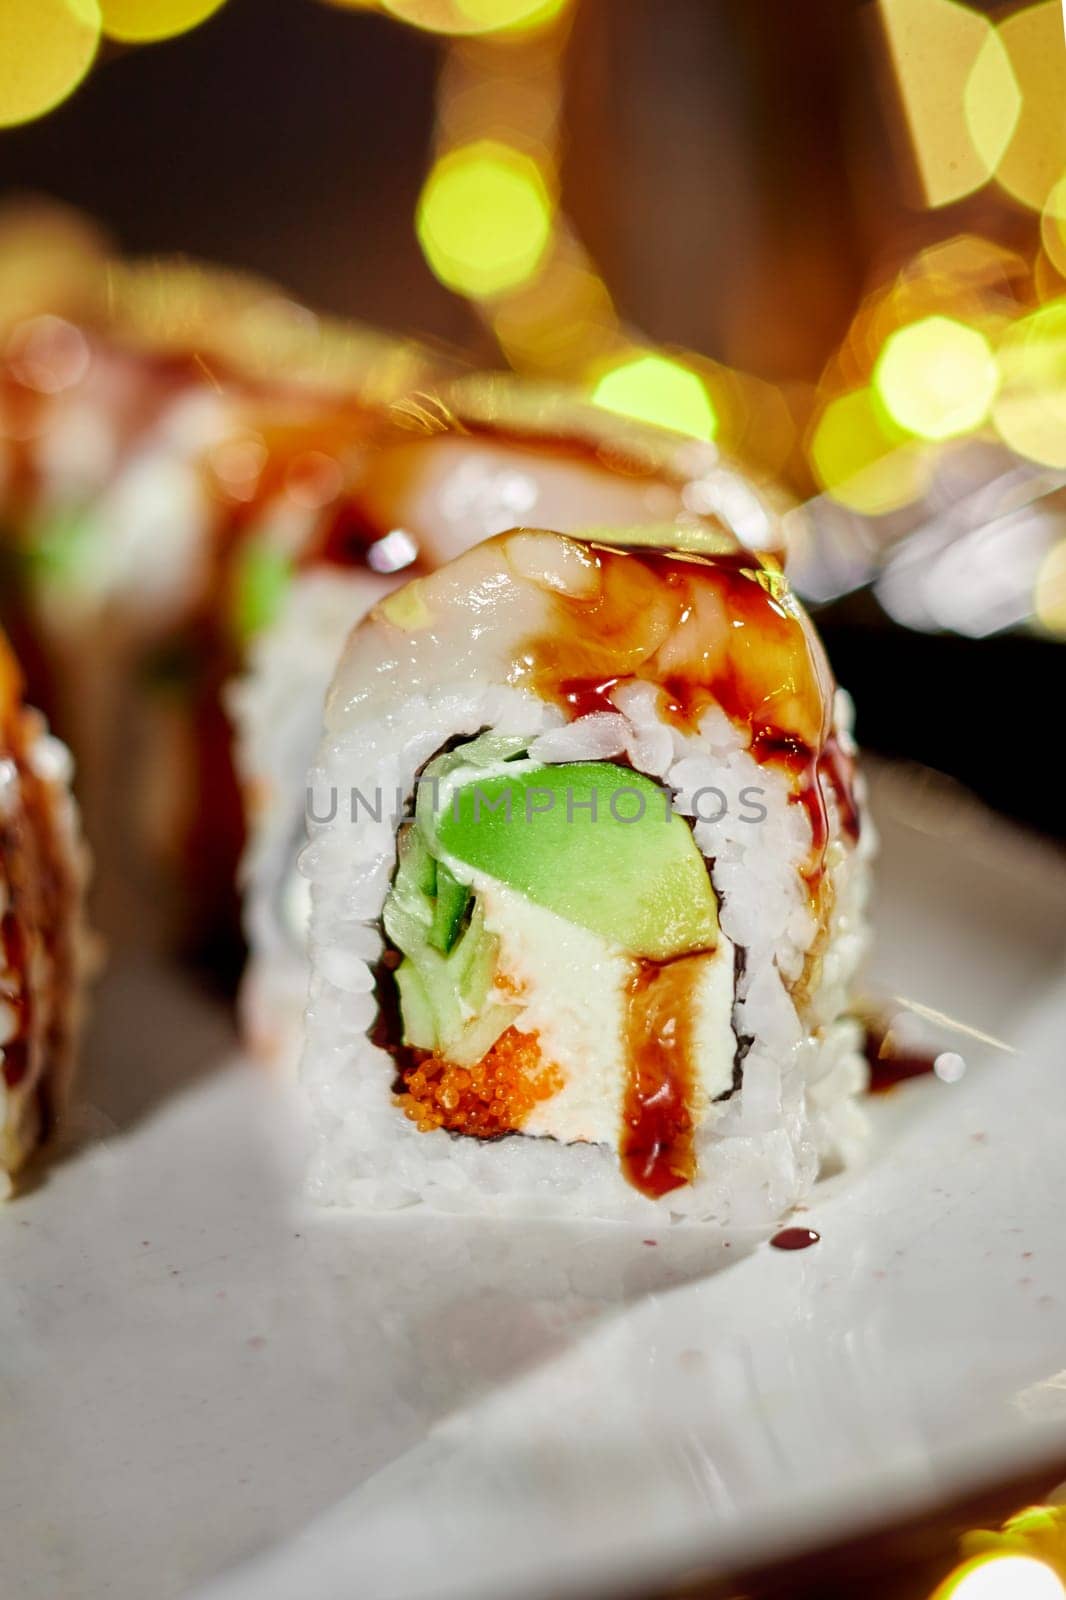 Closeup of appetizing sushi roll with sea scallop, cream cheese, masago roe, cucumbers and avocado seasoned with spicy mayo an unagi sauce served against warm festive lights